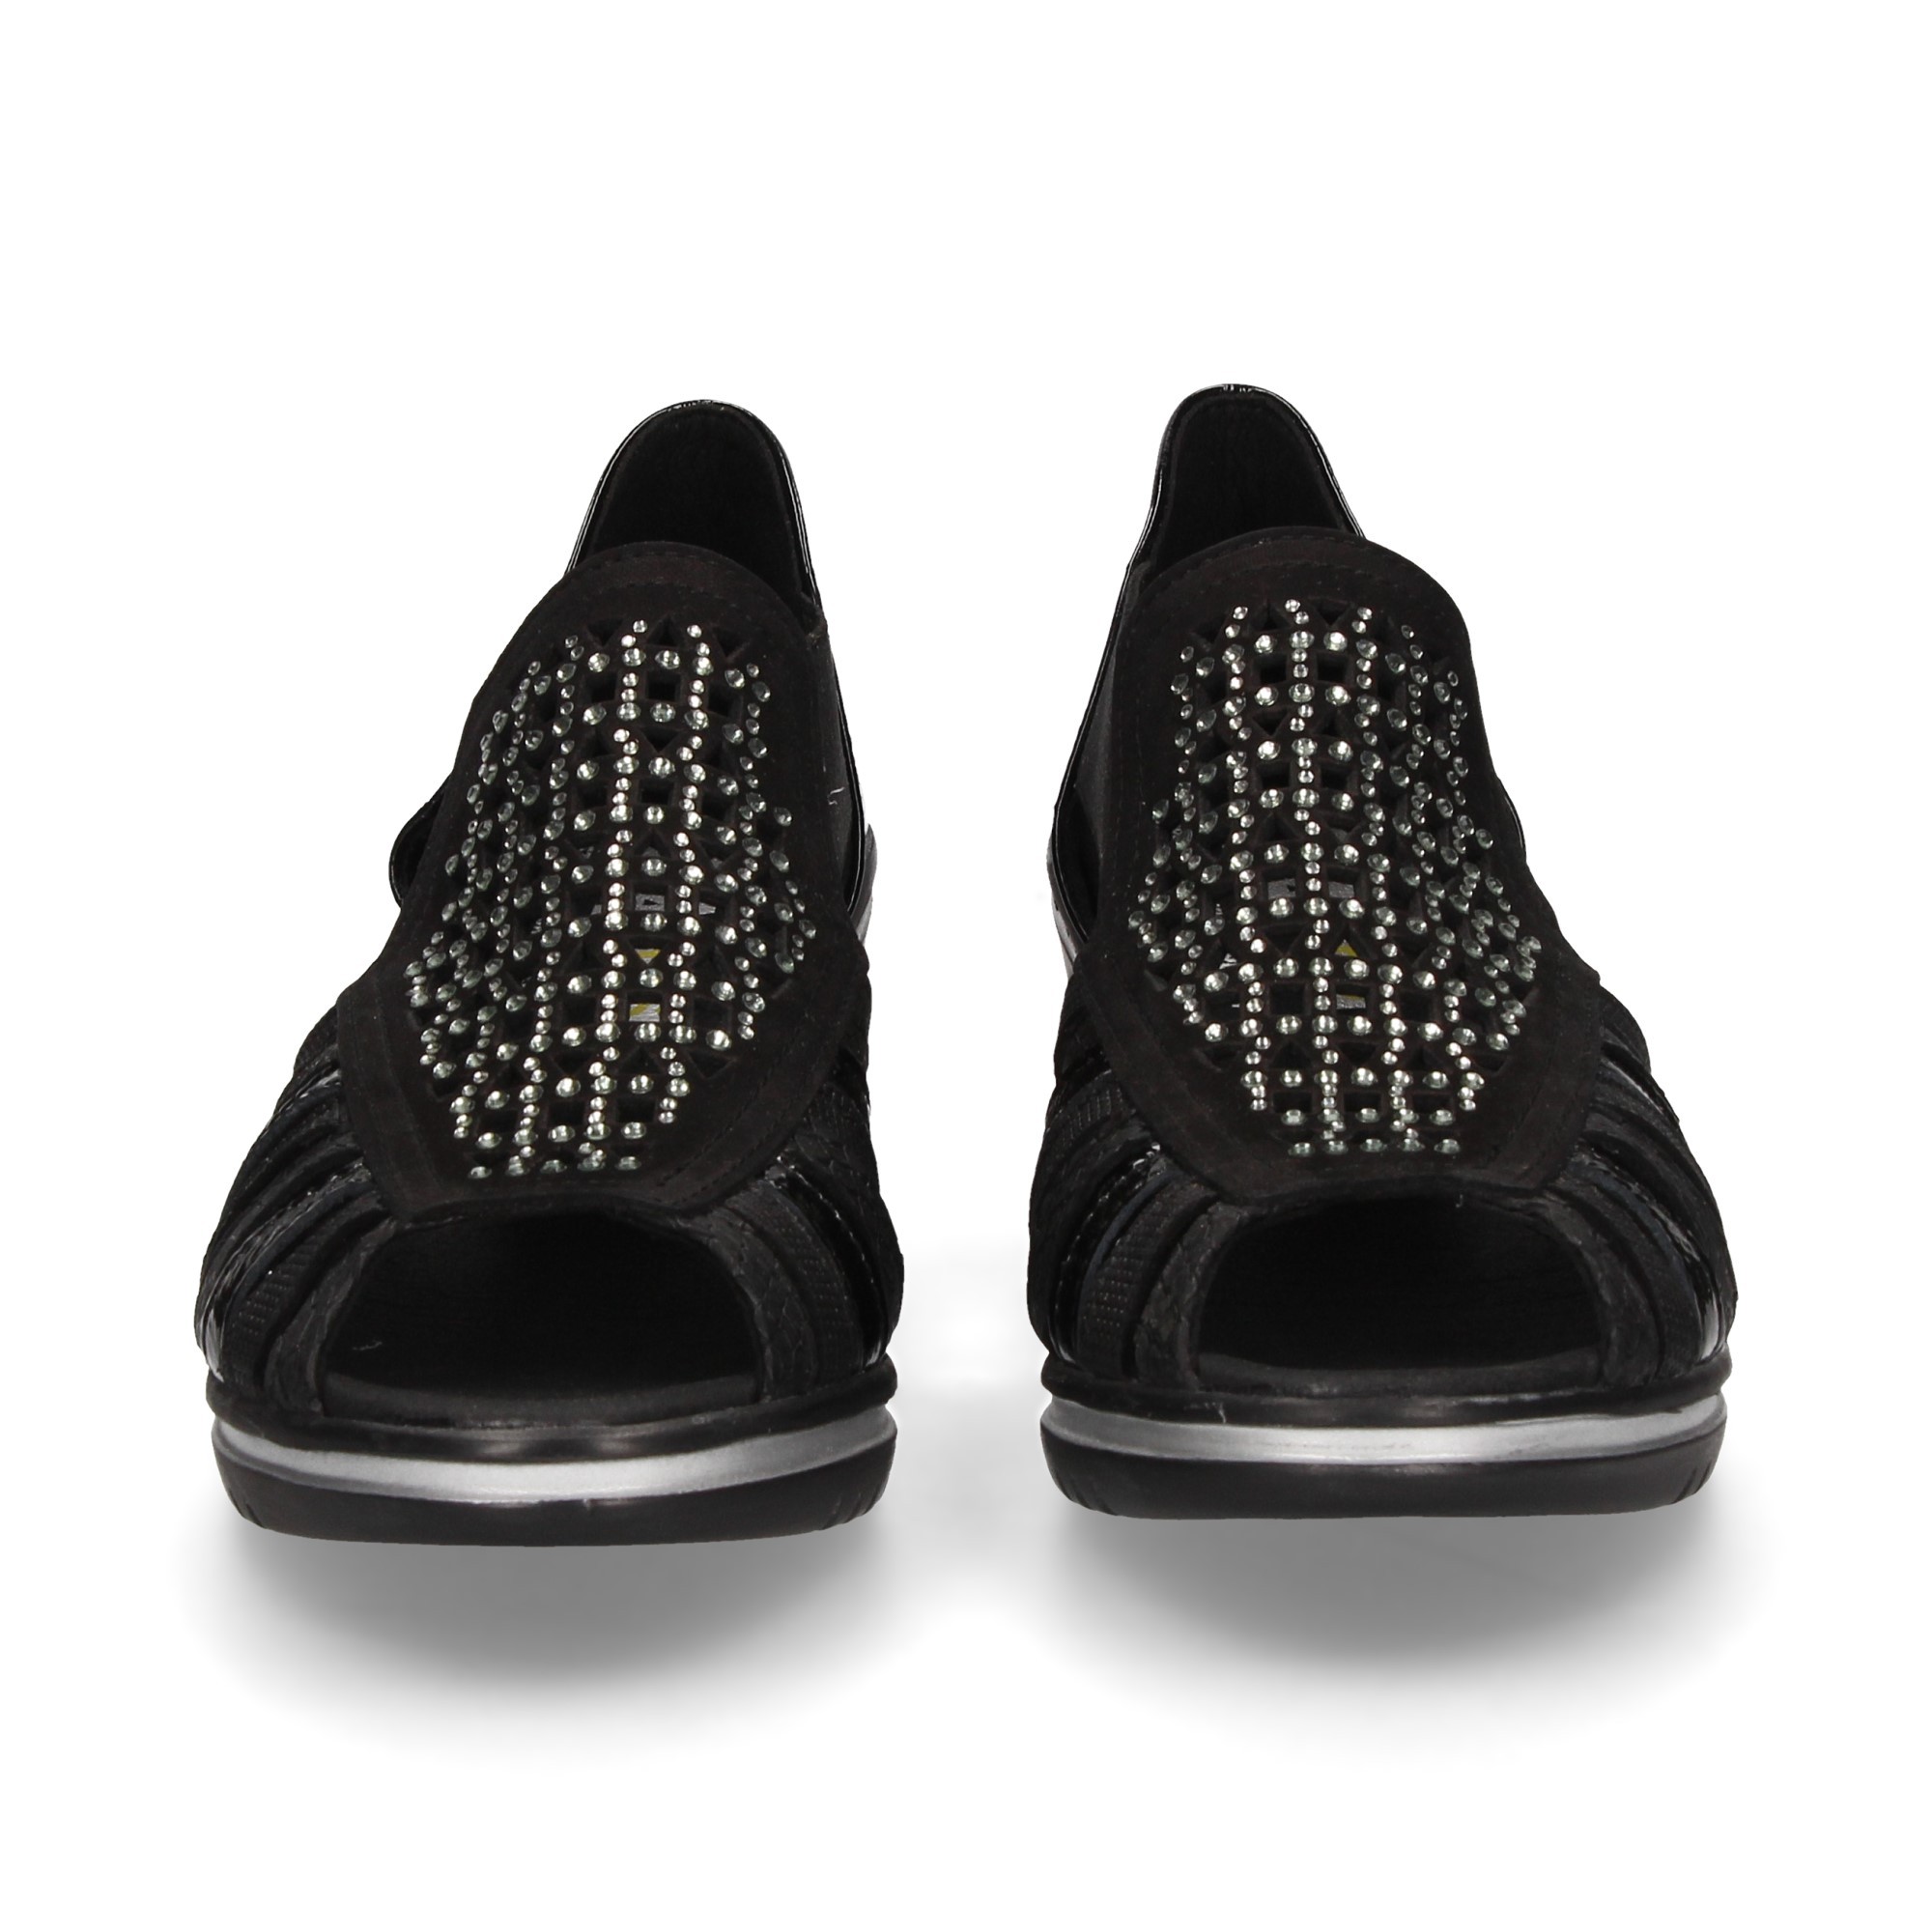 wedge-a-sides-instep-broth-black-strass